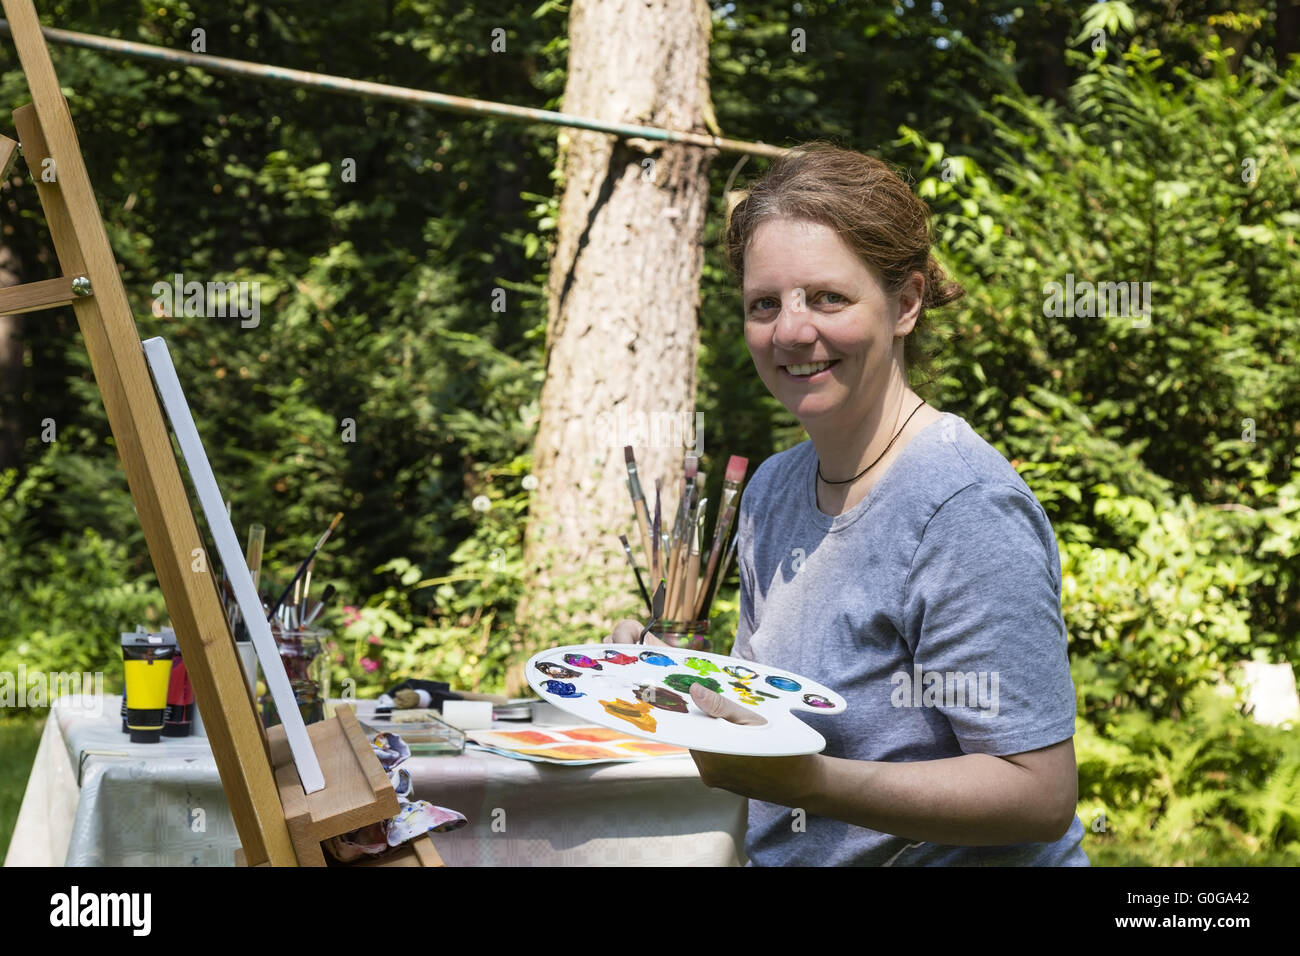 woman is painting Stock Photo